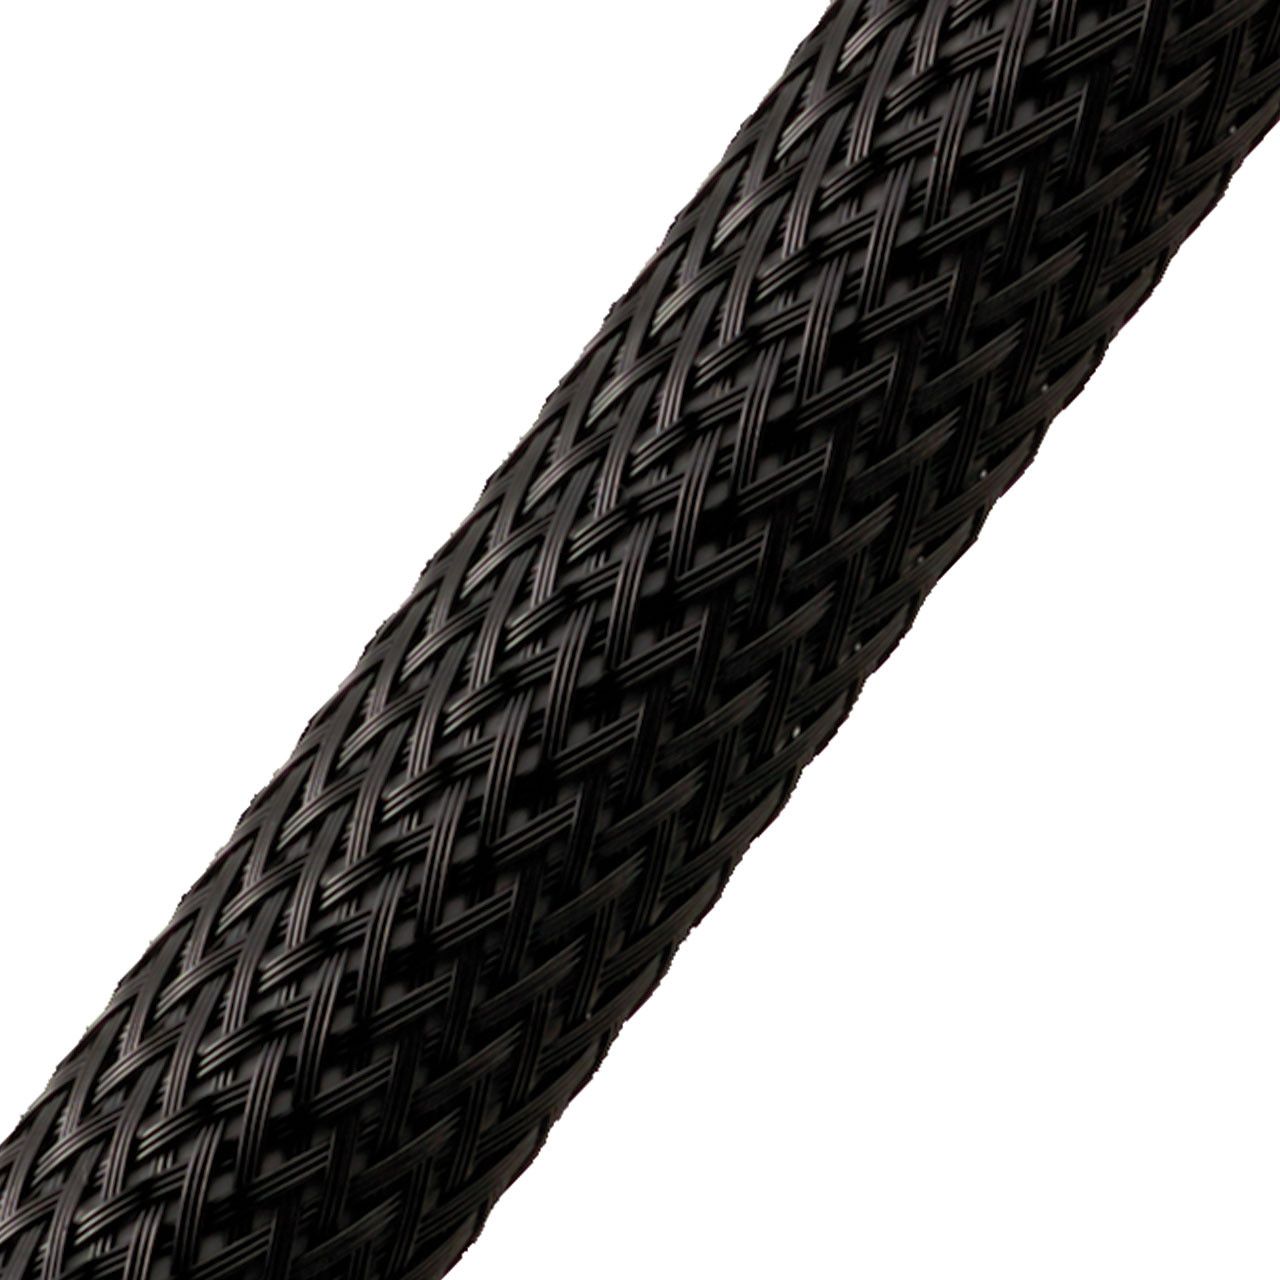 BRAIDED SLEEVE 5/8" 100' BLACK EXPANDS 3/8"-1"